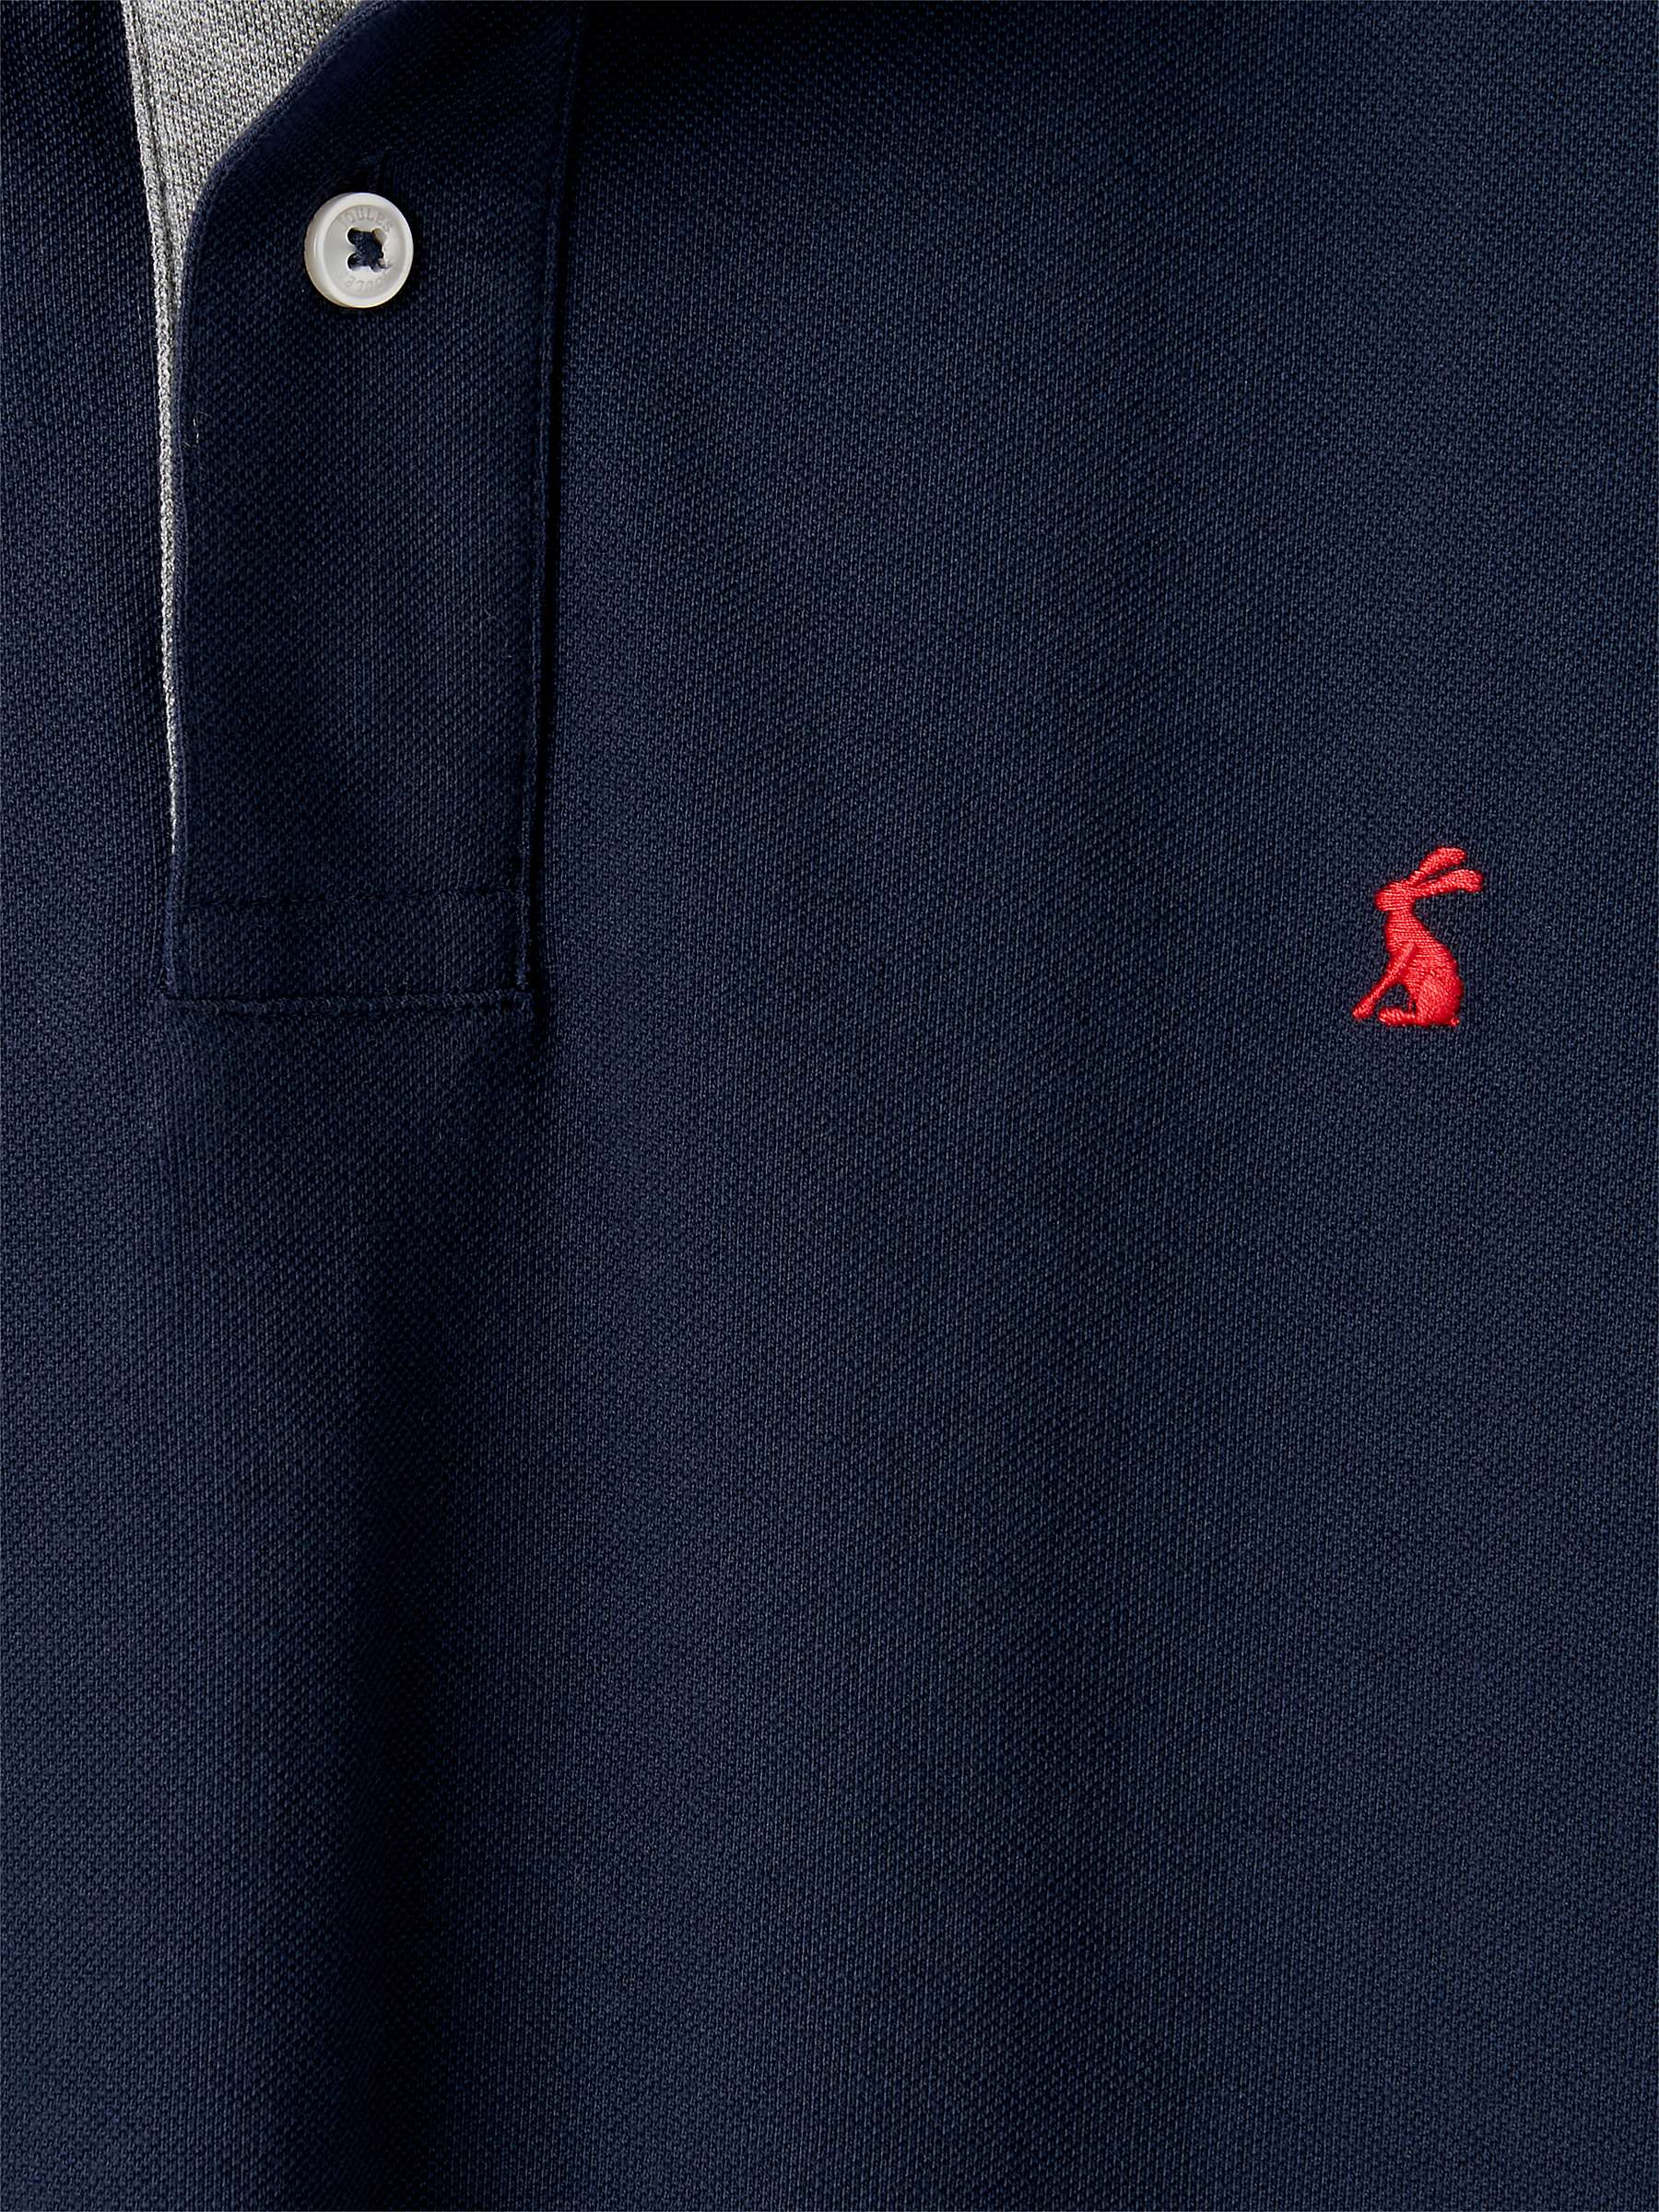 Buy Joules Classic Fit Polo Shirt Online at johnlewis.com